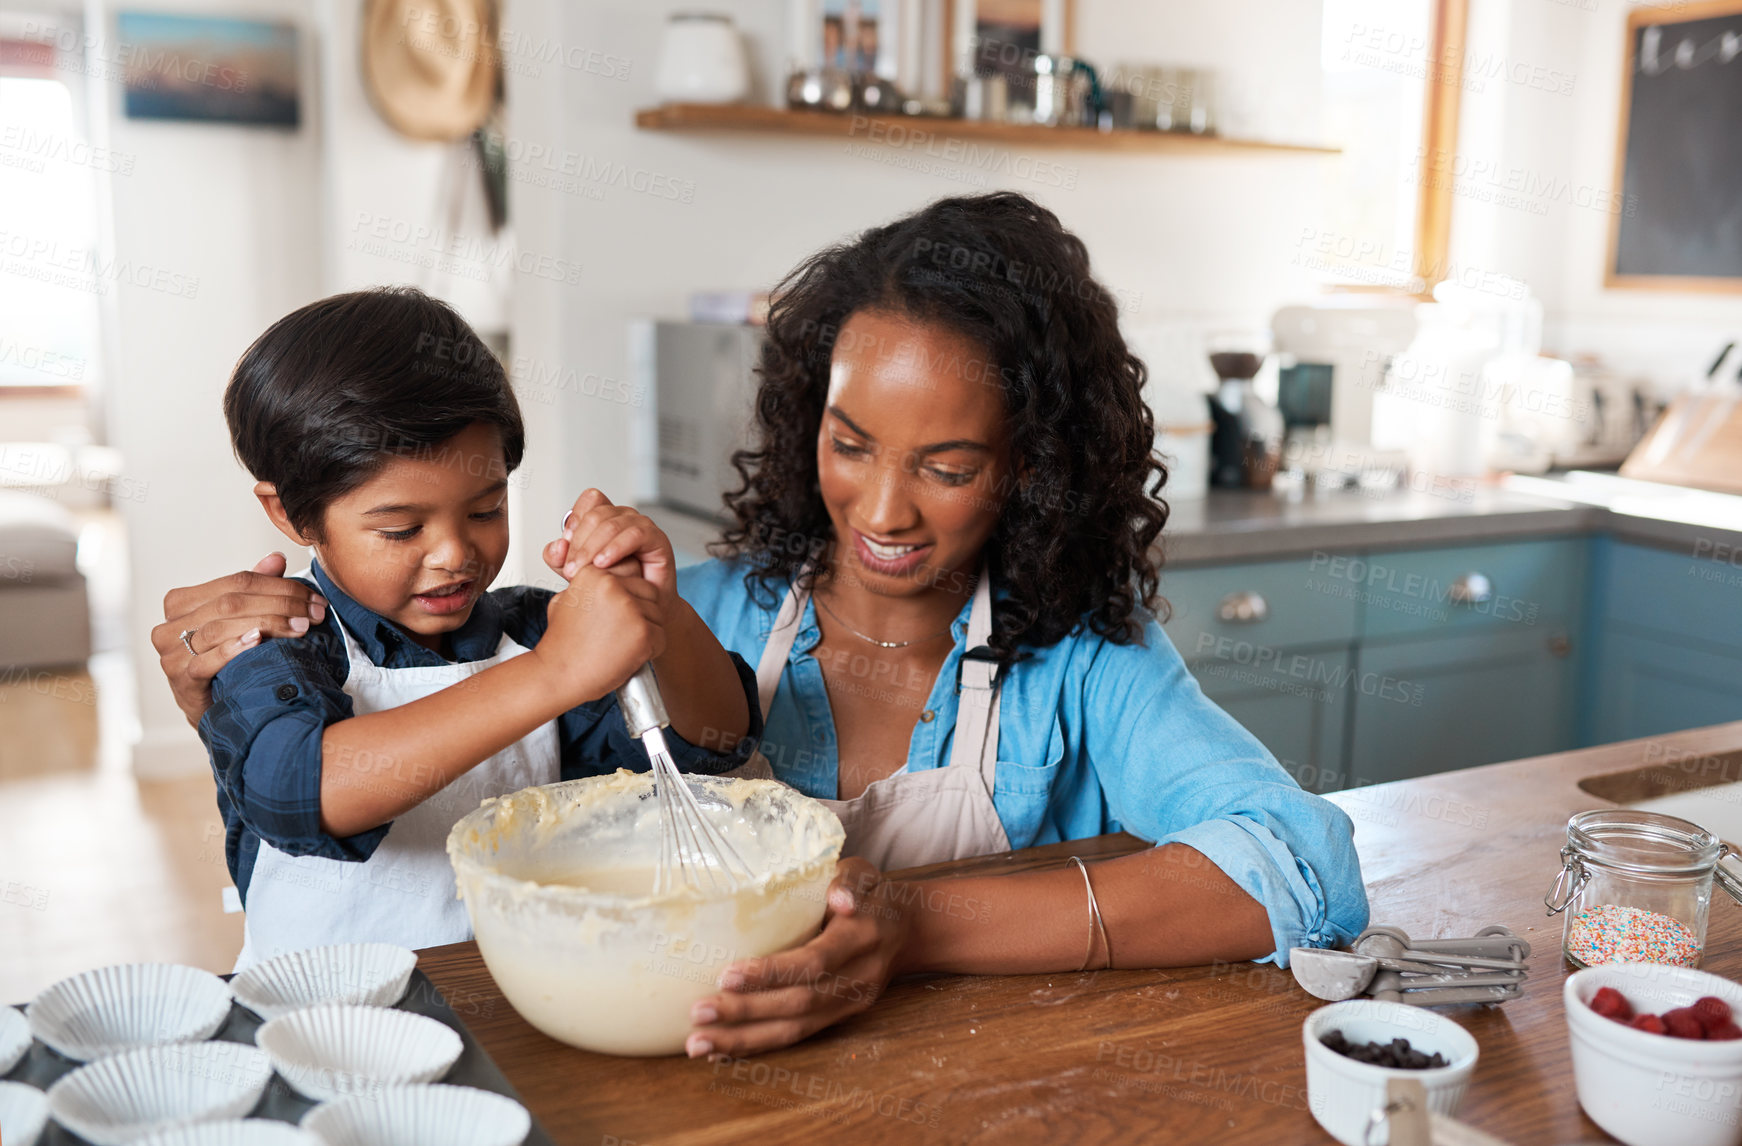 Buy stock photo Shot of a woman baking at home with her young son